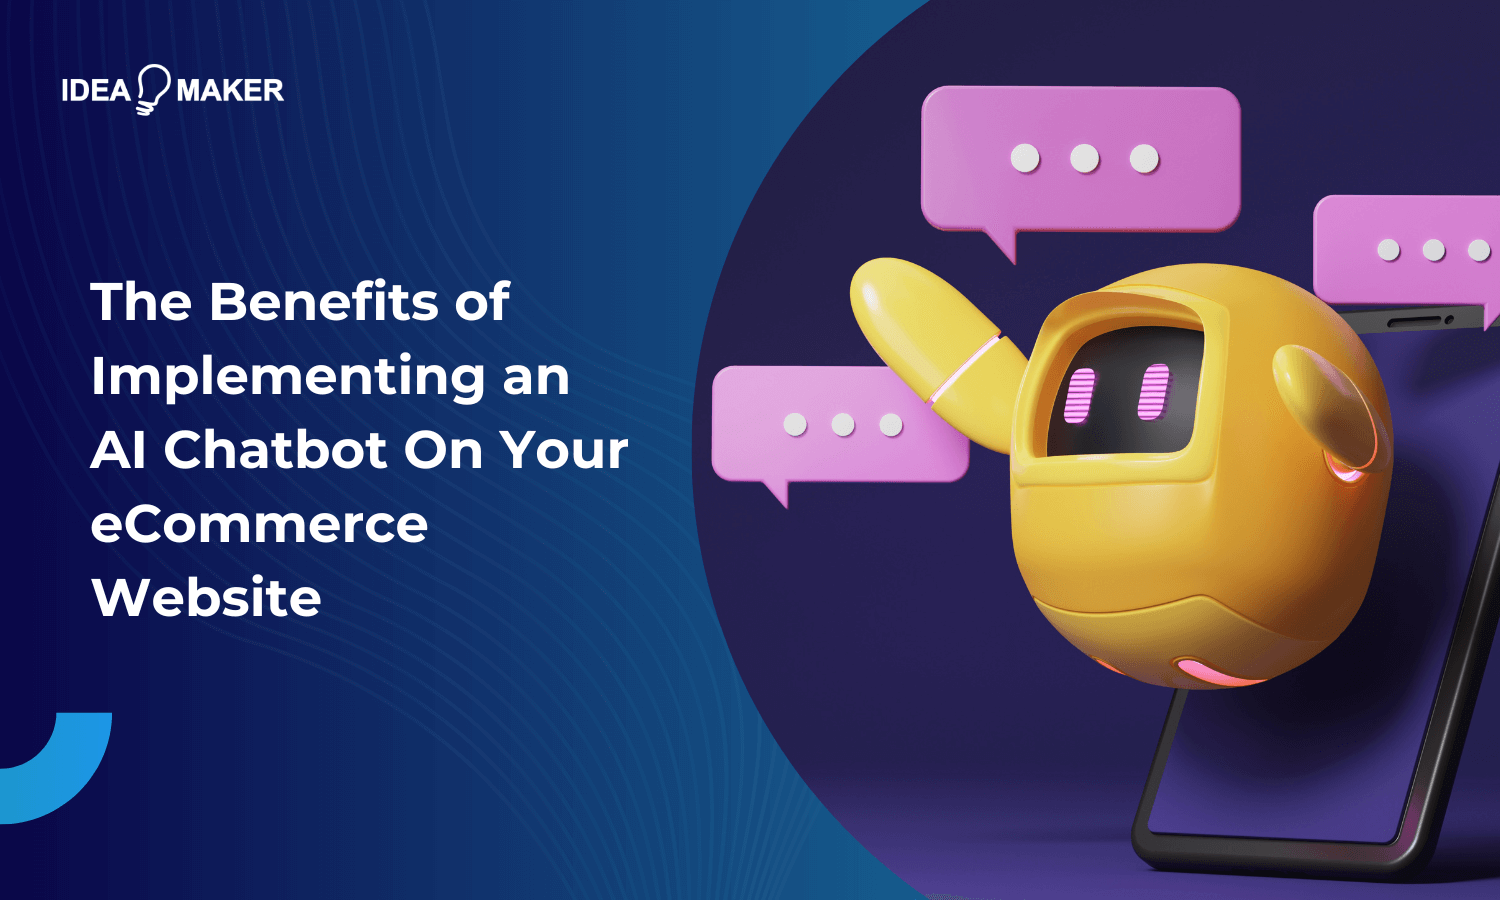 The Benefits of Implementing an AI Chatbot On Your eCommerce Website